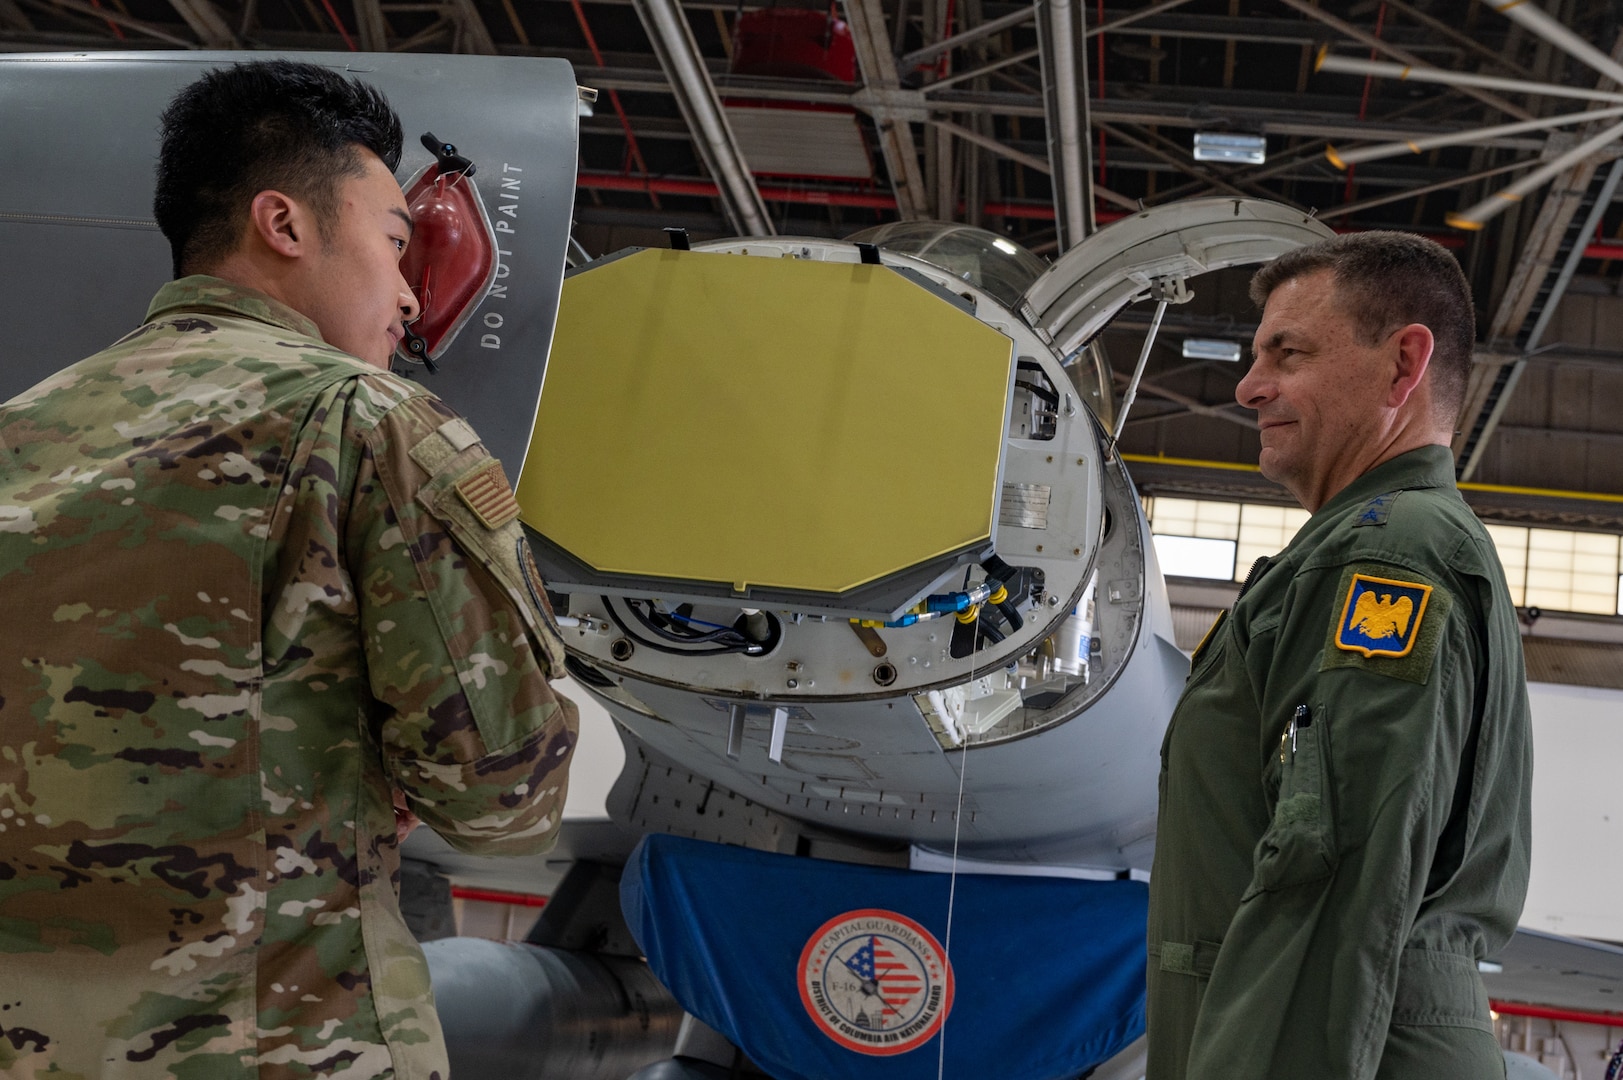 U.S. Air Force Staff Sgt. Jackie Zheng, left, avionics specialist, 113th Wing, District of Columbia National Guard, briefs Lt. Gen. Michael A. Loh, right, director, Air National Guard, on the specifications of the Active Electronically Scanned Array radar now equipped on F-16 Fighting Falcon aircraft assigned to the DCNG on Joint Base Andrews, Maryland, June 9, 2022. The AESA radar brings up-to-date capabilities to this legacy aircraft and enhances the ANG’s integrated defense efforts while remaining interoperable with the Total Force and coalition partners.